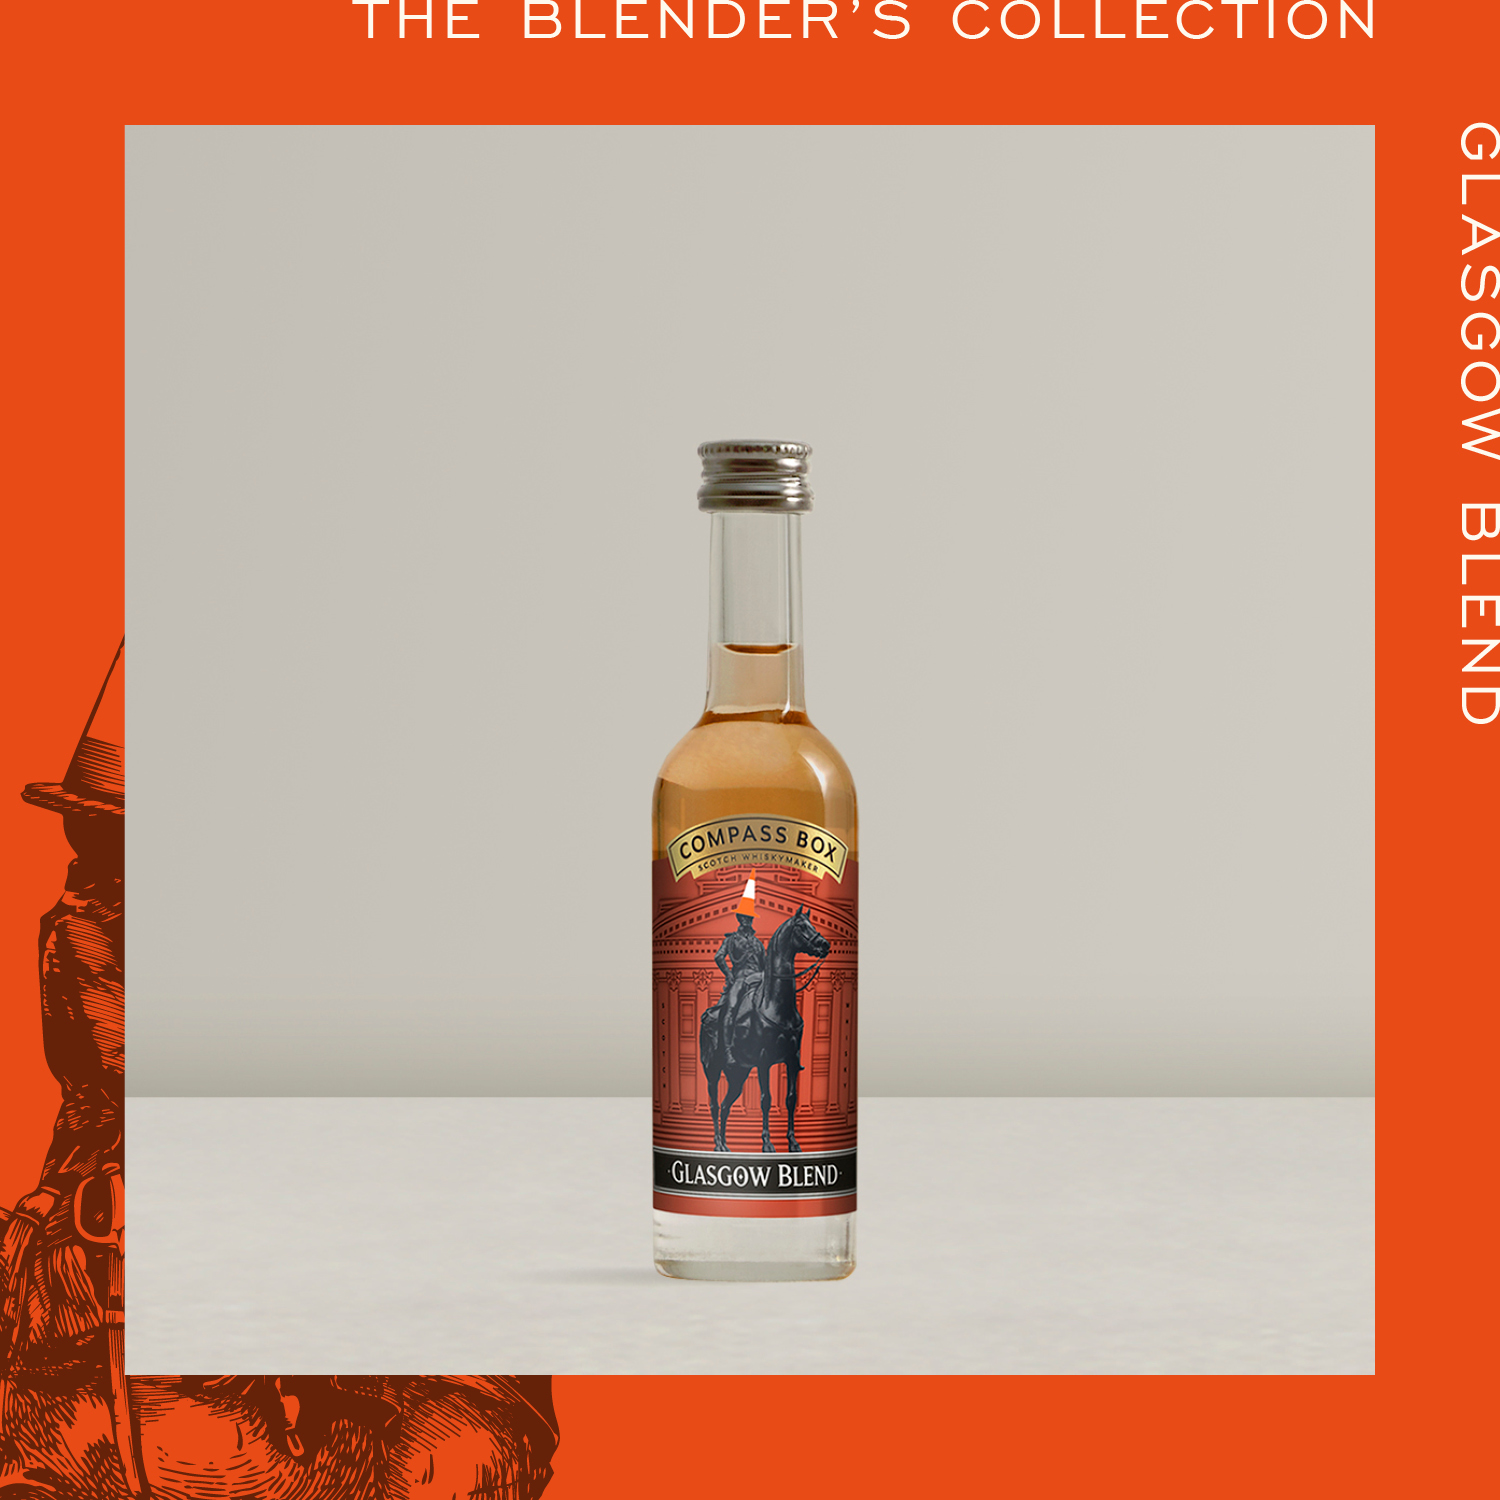 glasgaw blend Compass Box The Blenders Collection